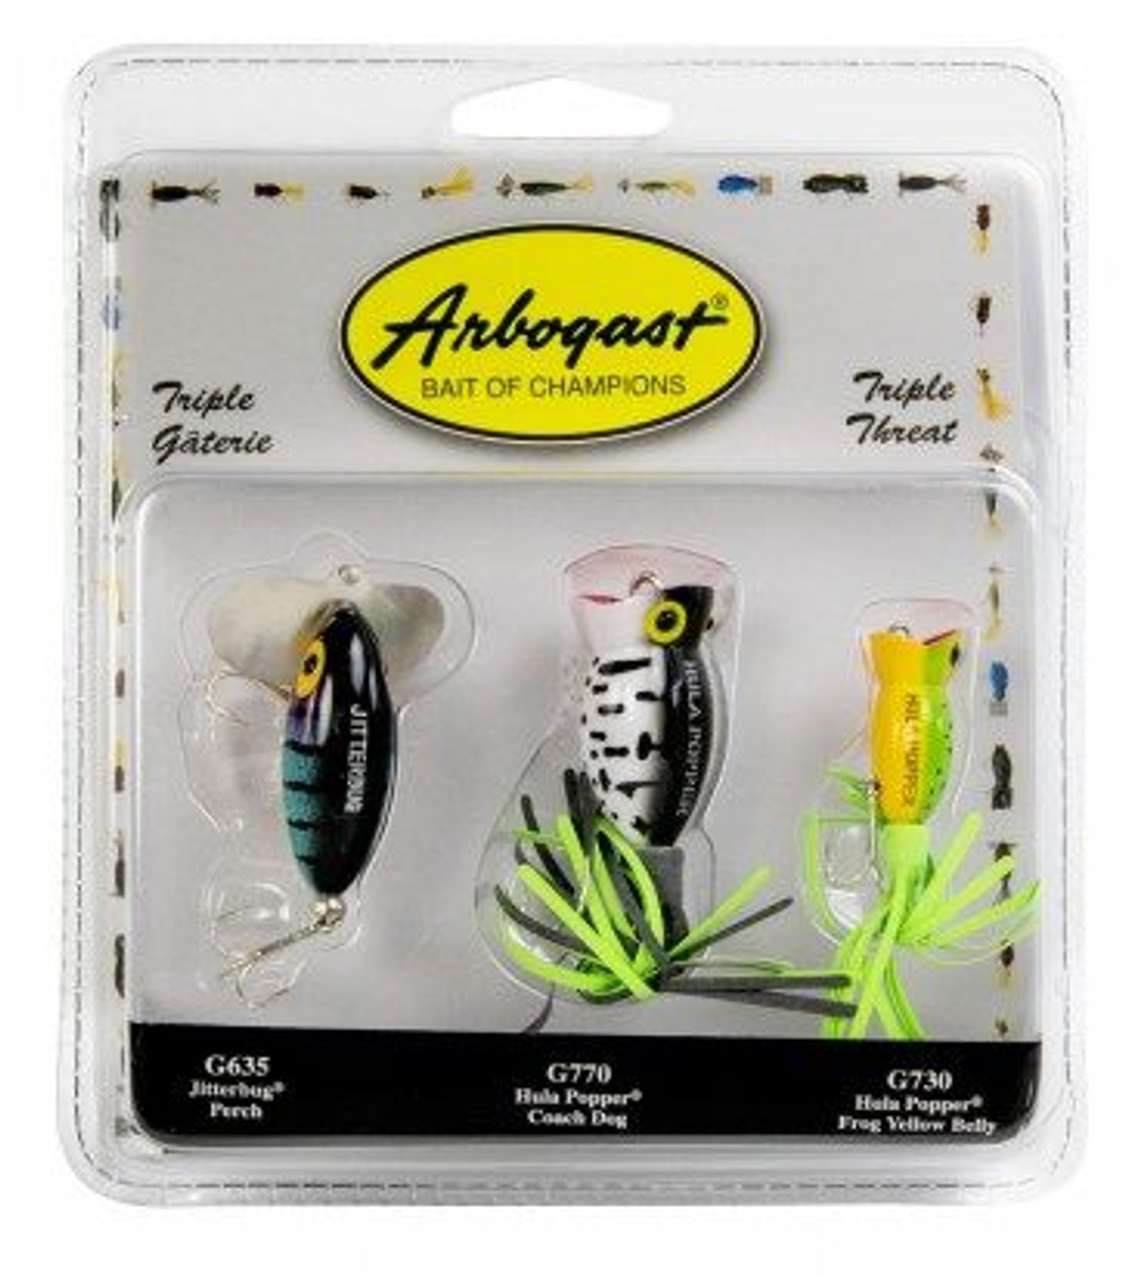 Arbogast Triple Threat Pack Assortment 1A